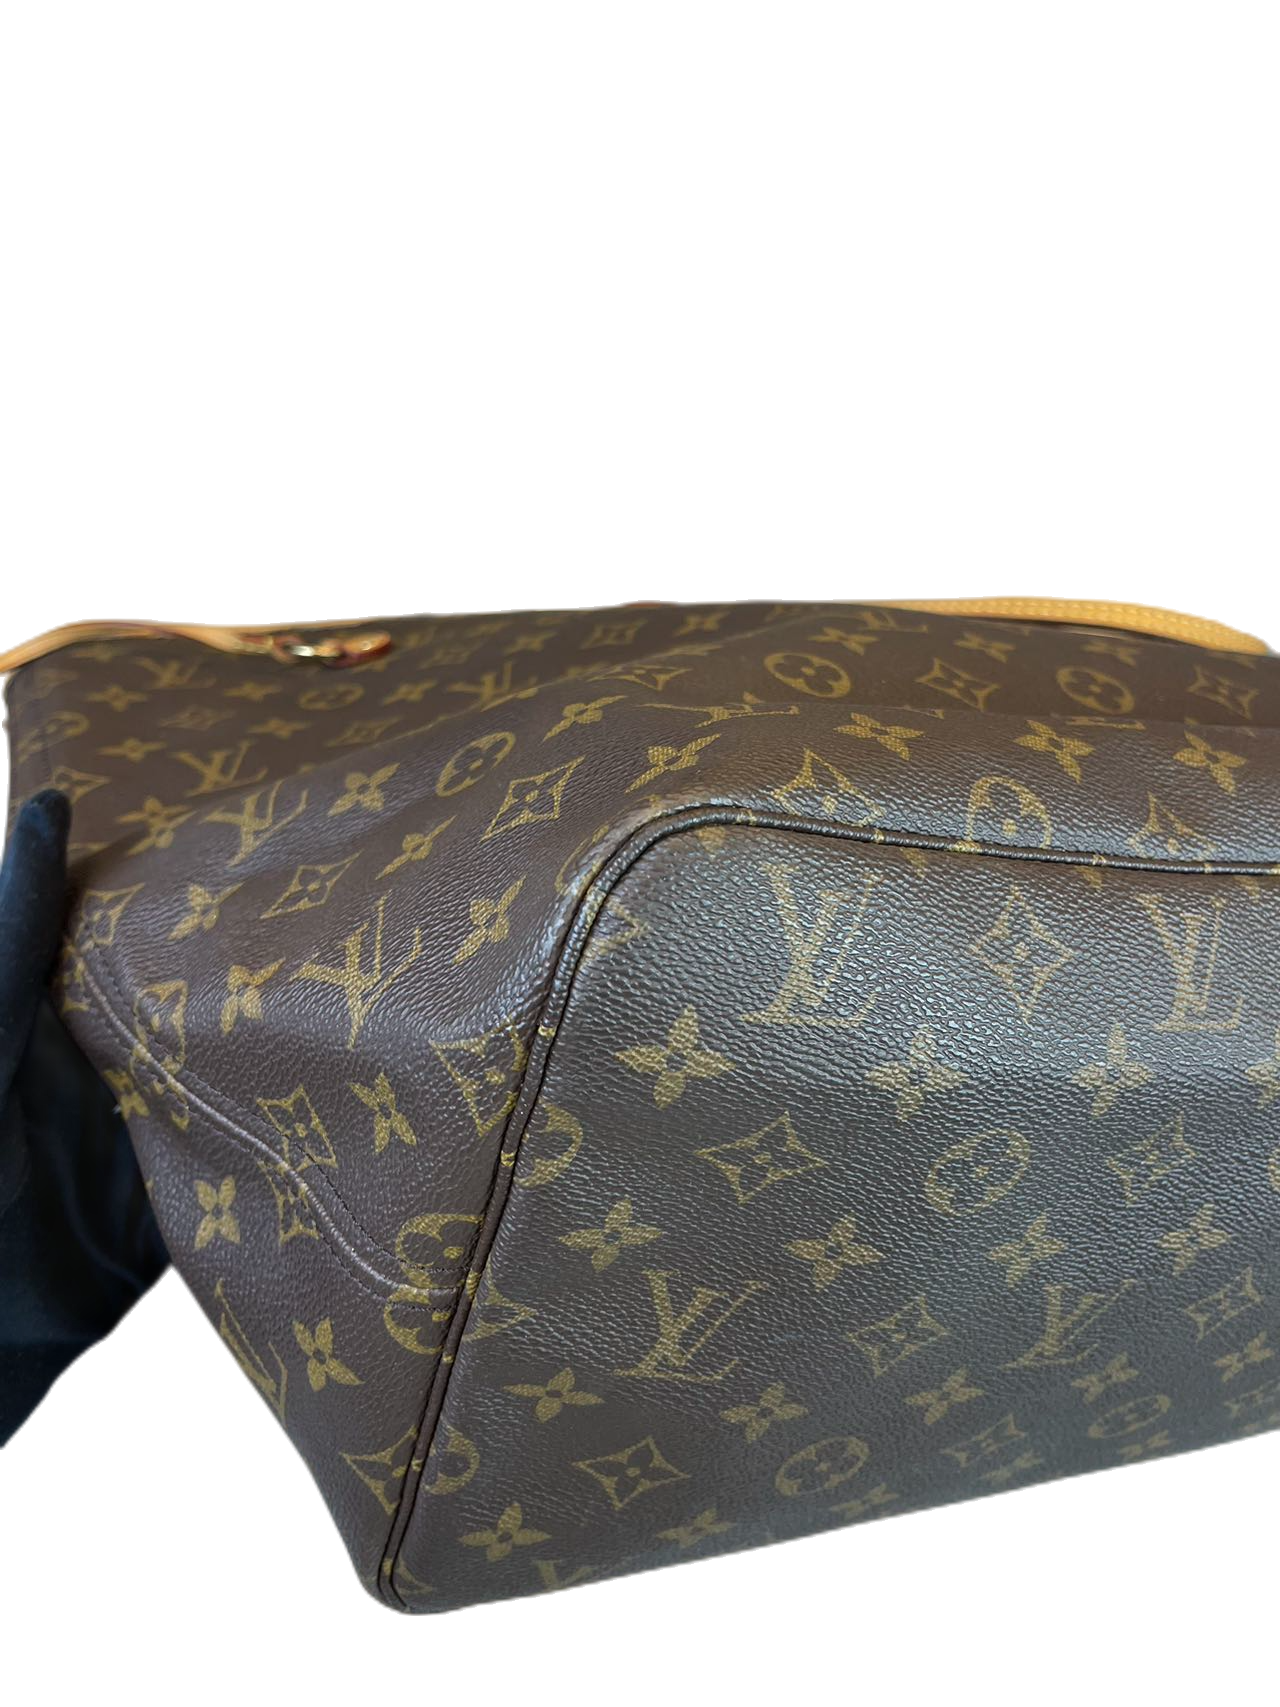 Preloved Louis Vuitton Monogram Canvas NeverFull GM Totes